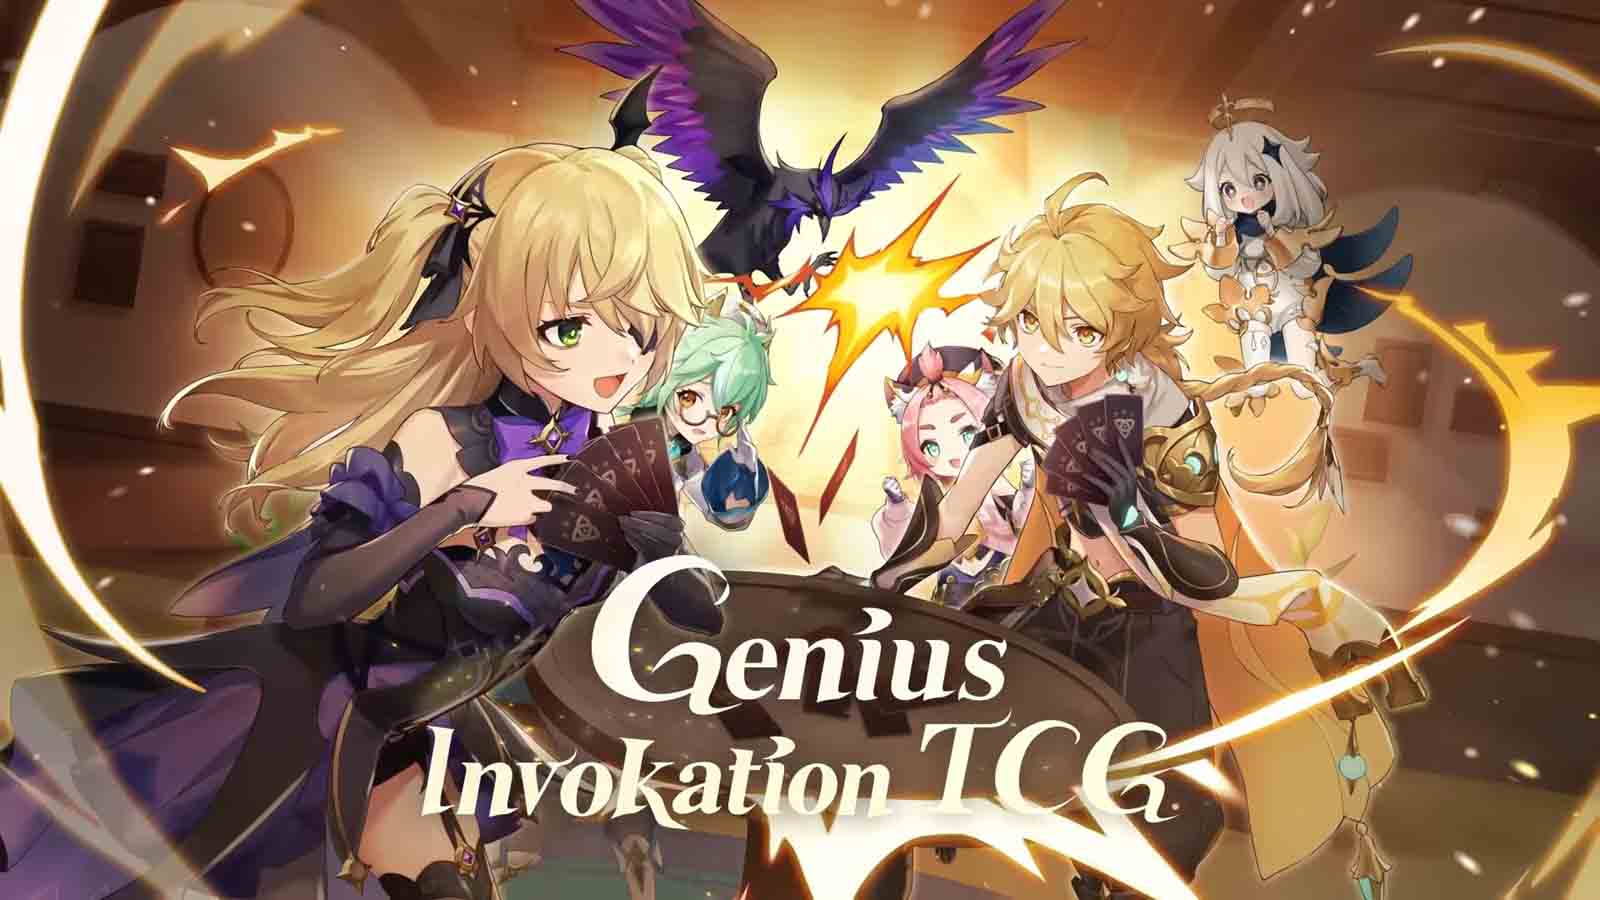 Everything to Know About Genius Invokation TCG